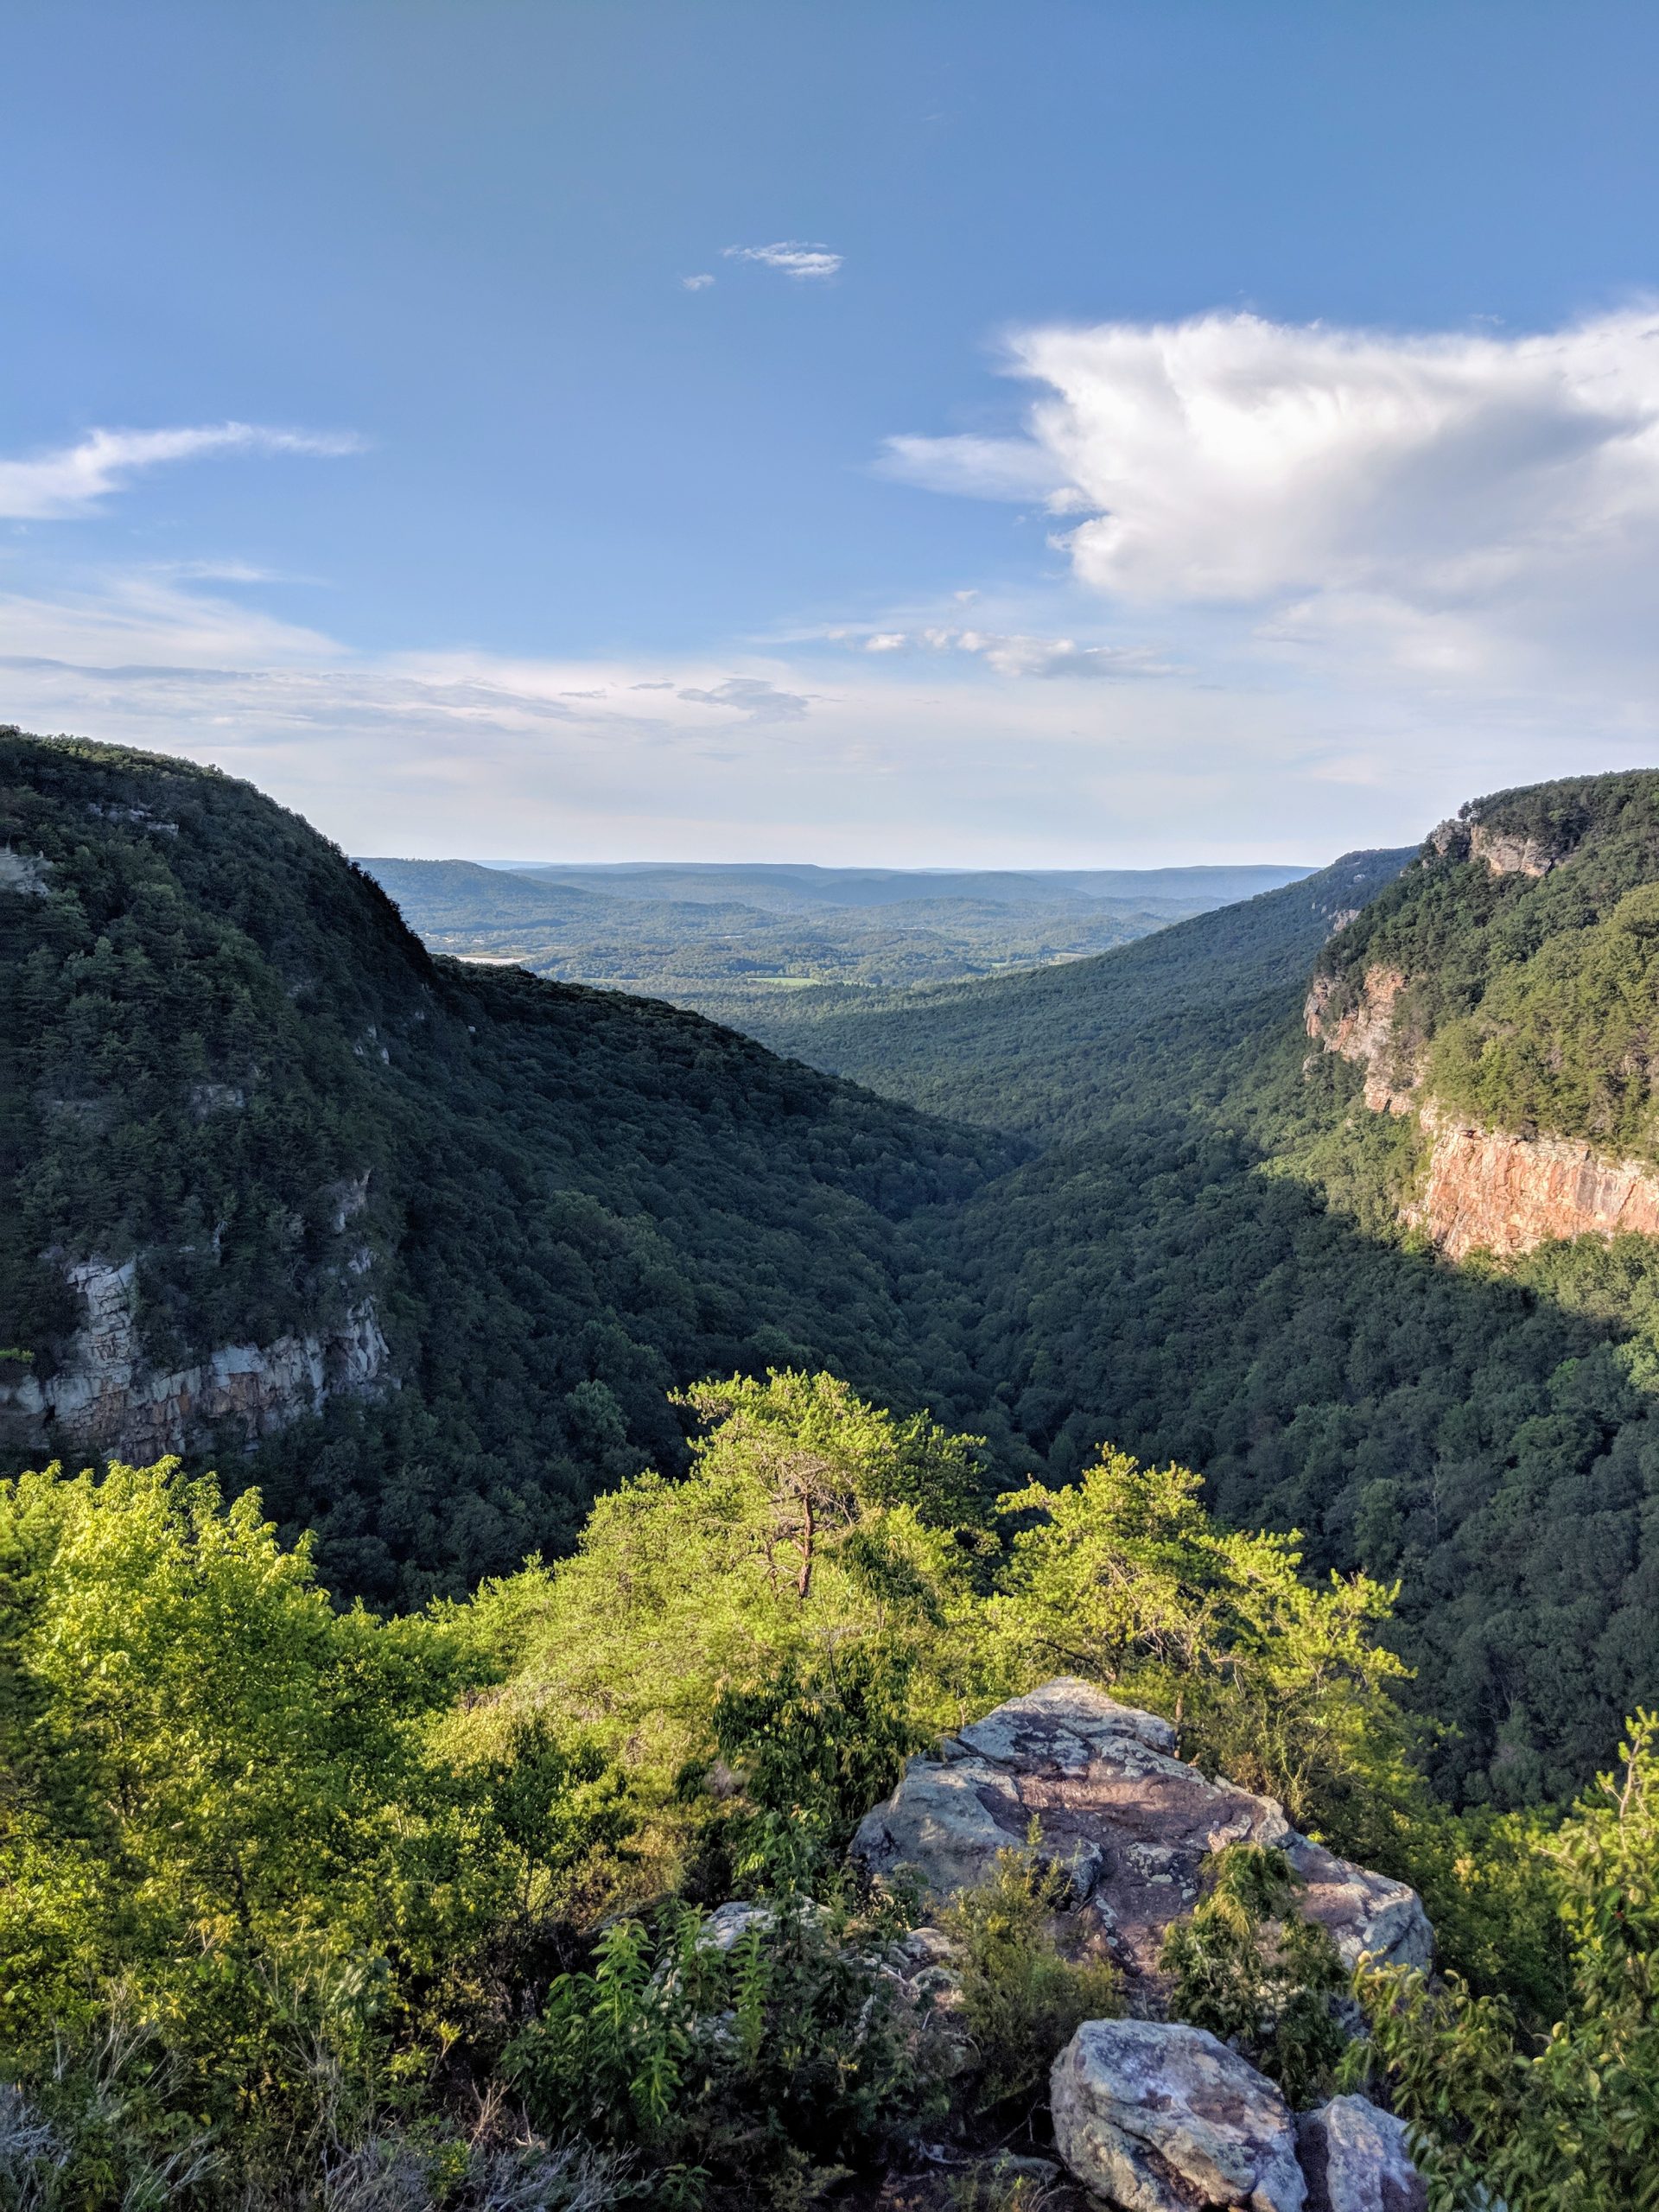 How To Explore Cloudland Canyon State Park In Georgia